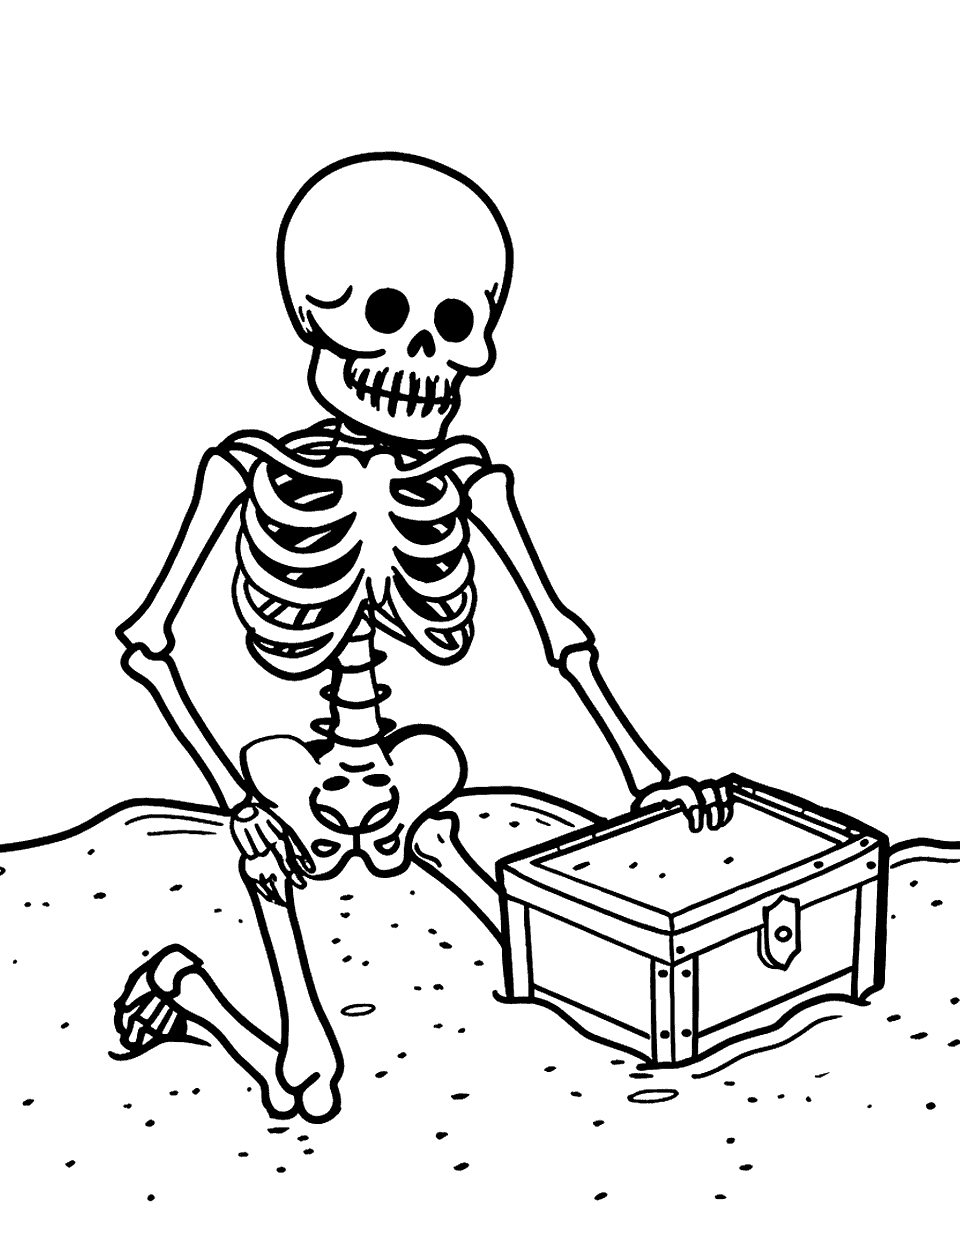 Skeleton Finding a Treasure Chest Coloring Page - A skeleton uncovering a treasure chest buried in sand.